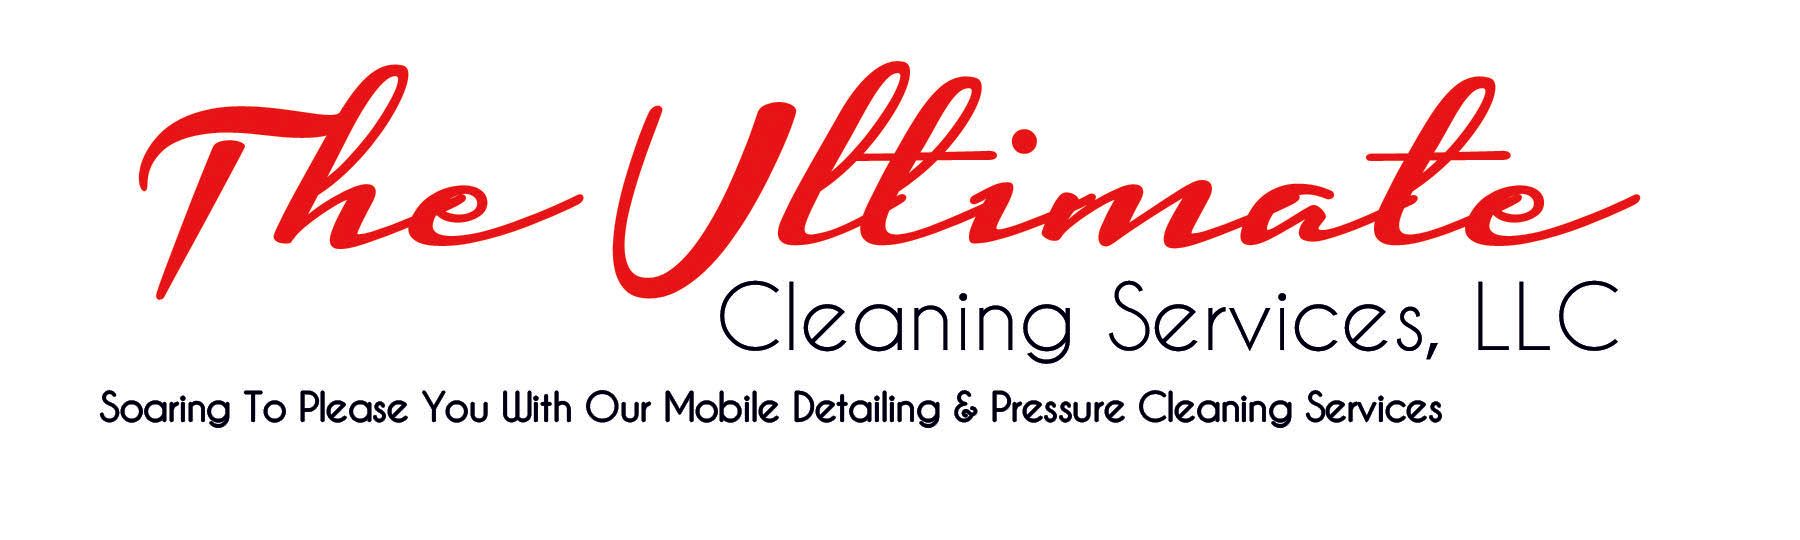 The Ultimate Cleaning Service - logo